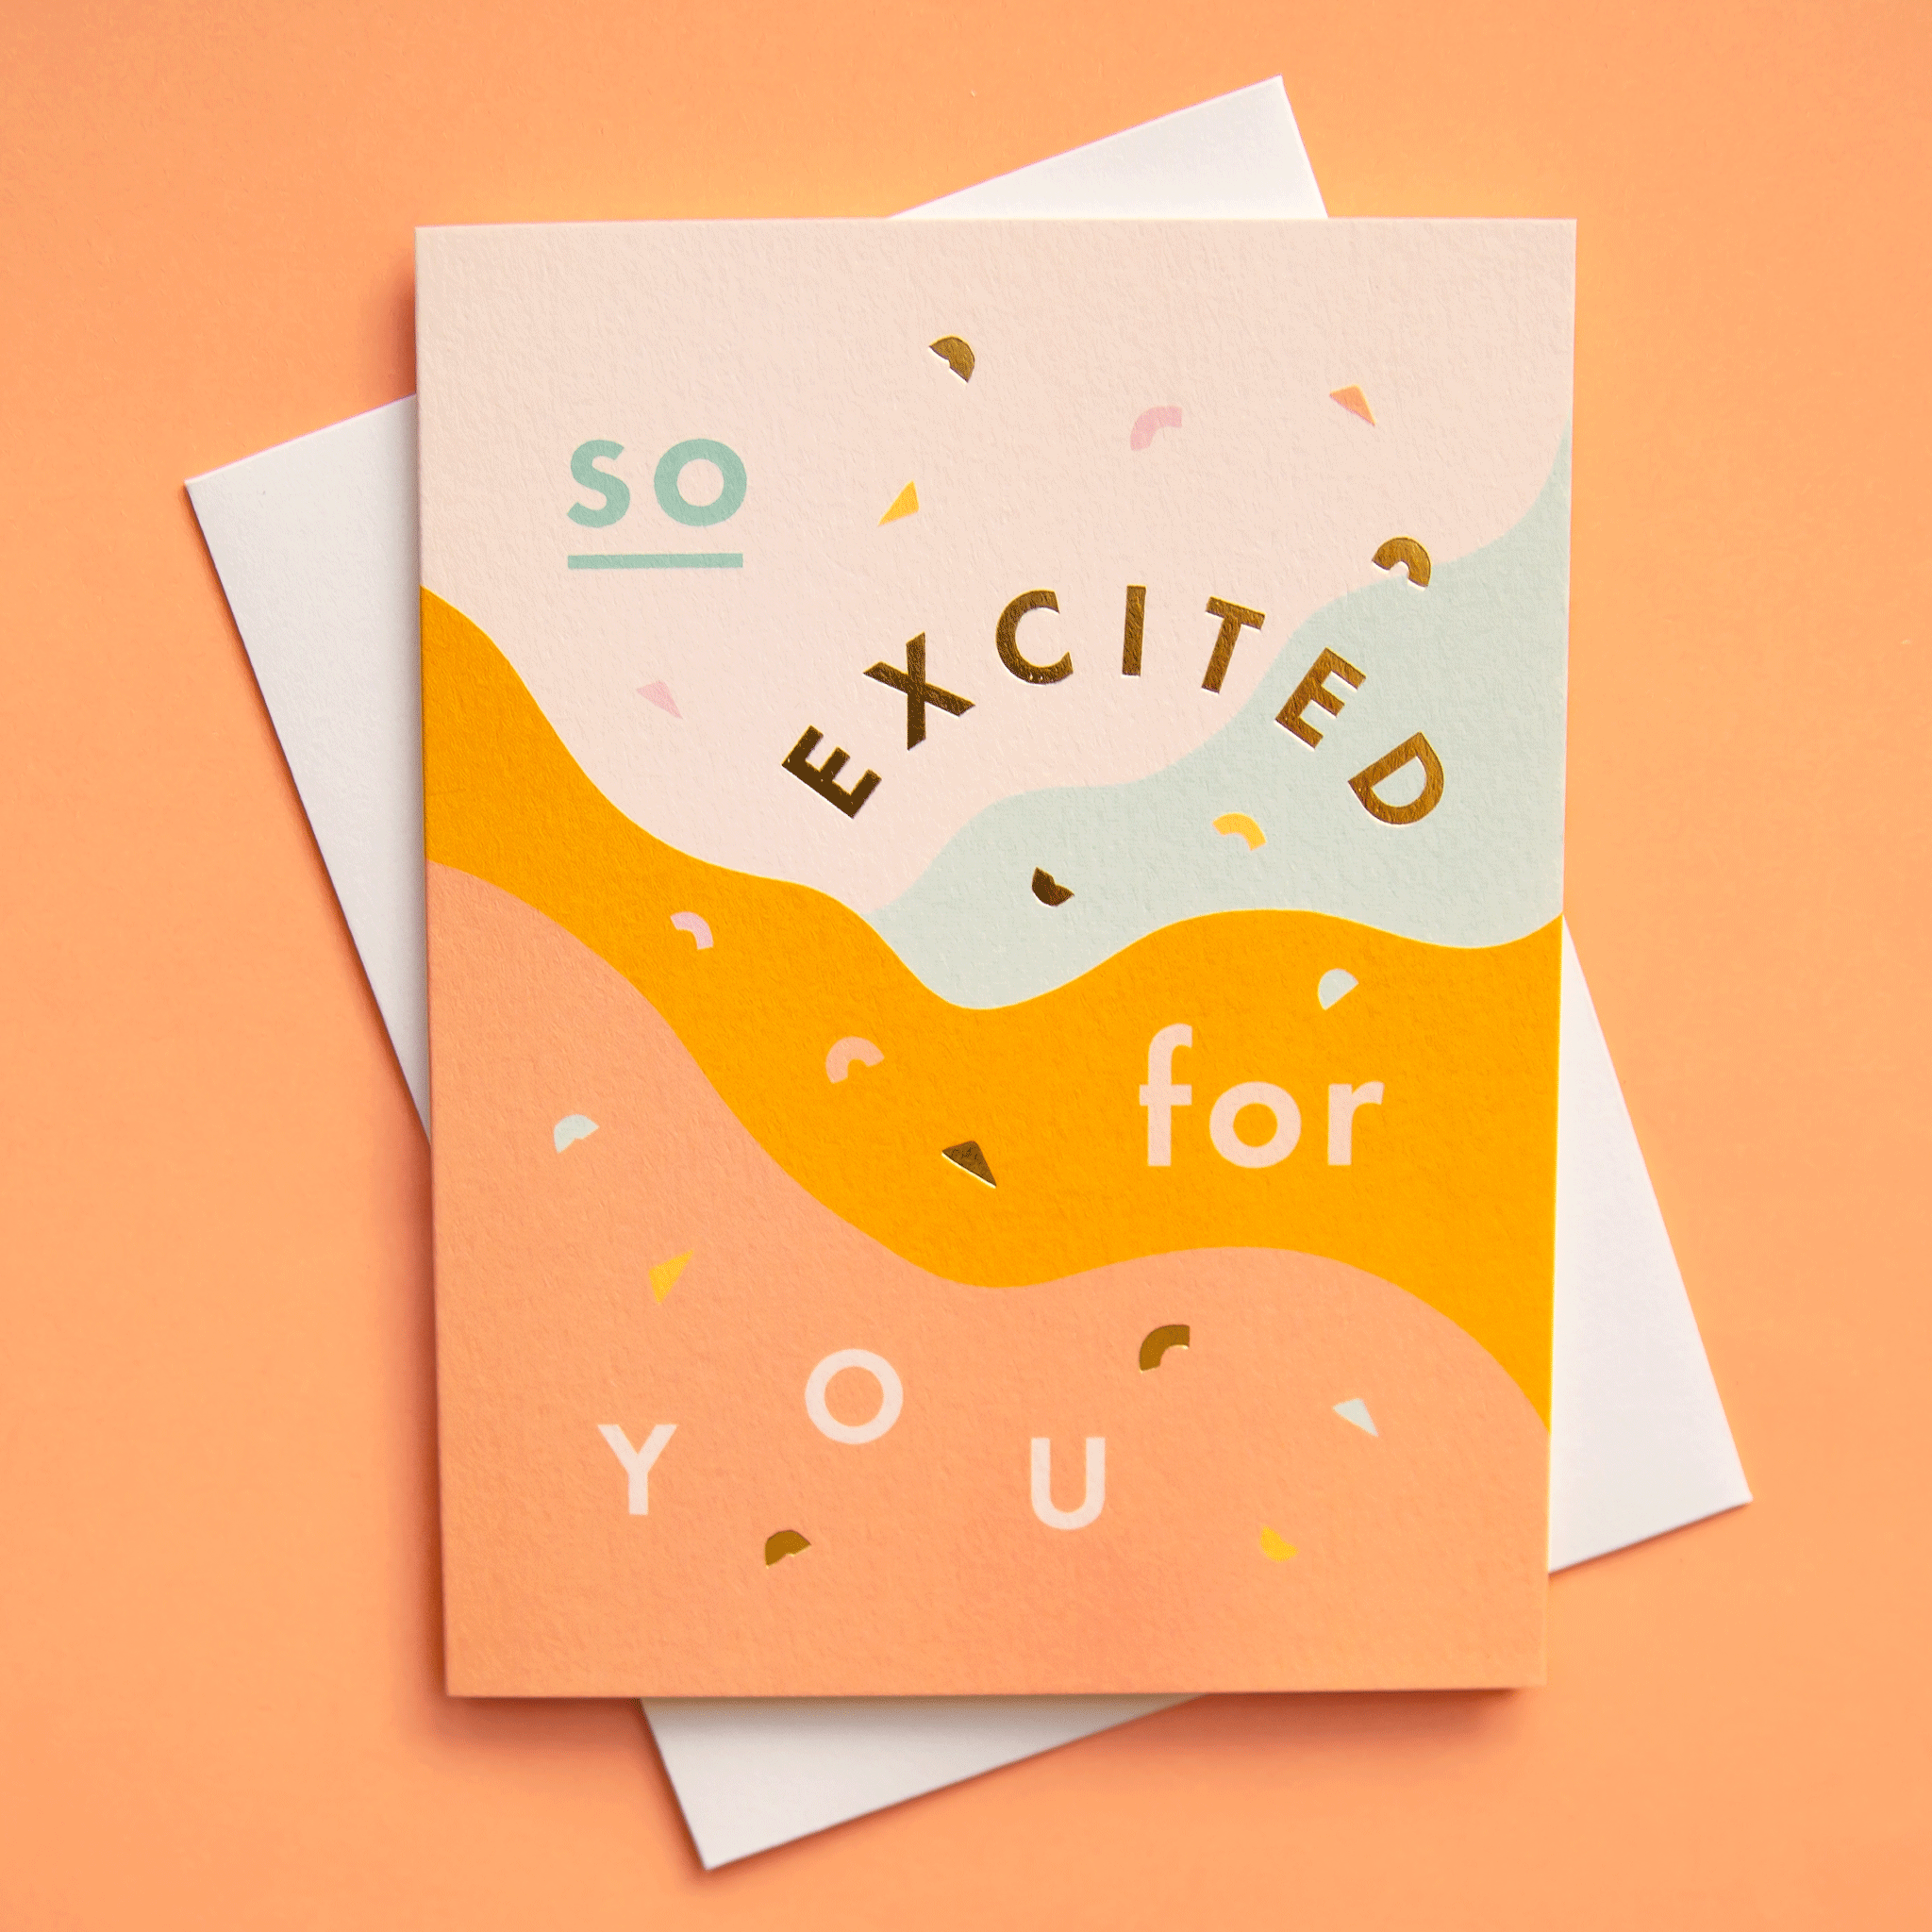 On a white background is a multicolored card with waves that reads, "So Excited for You" in different colored text.